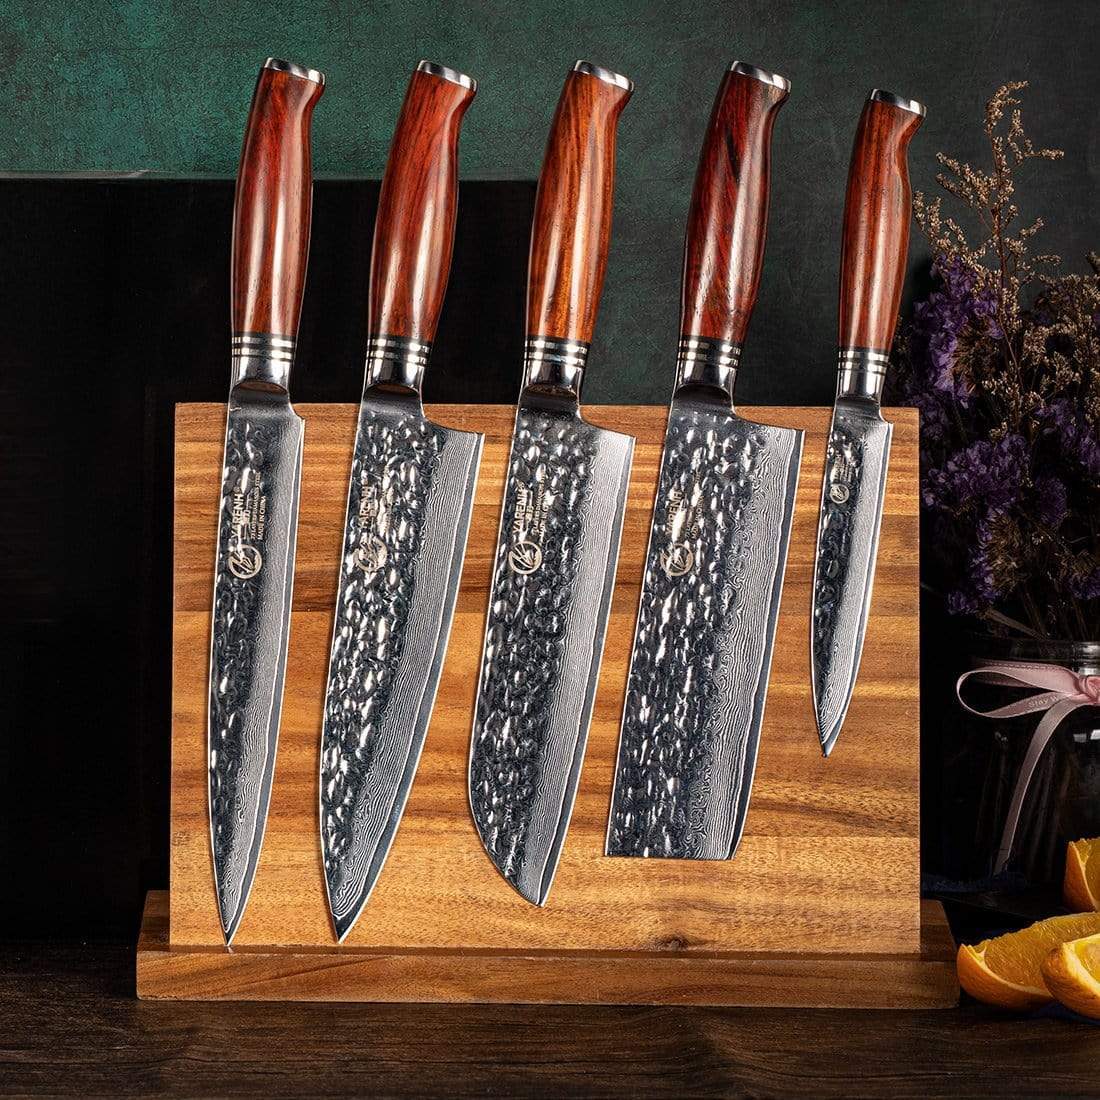 Knife Set Block | 5 Piece | Gladiator Series Knives | Dalstrong